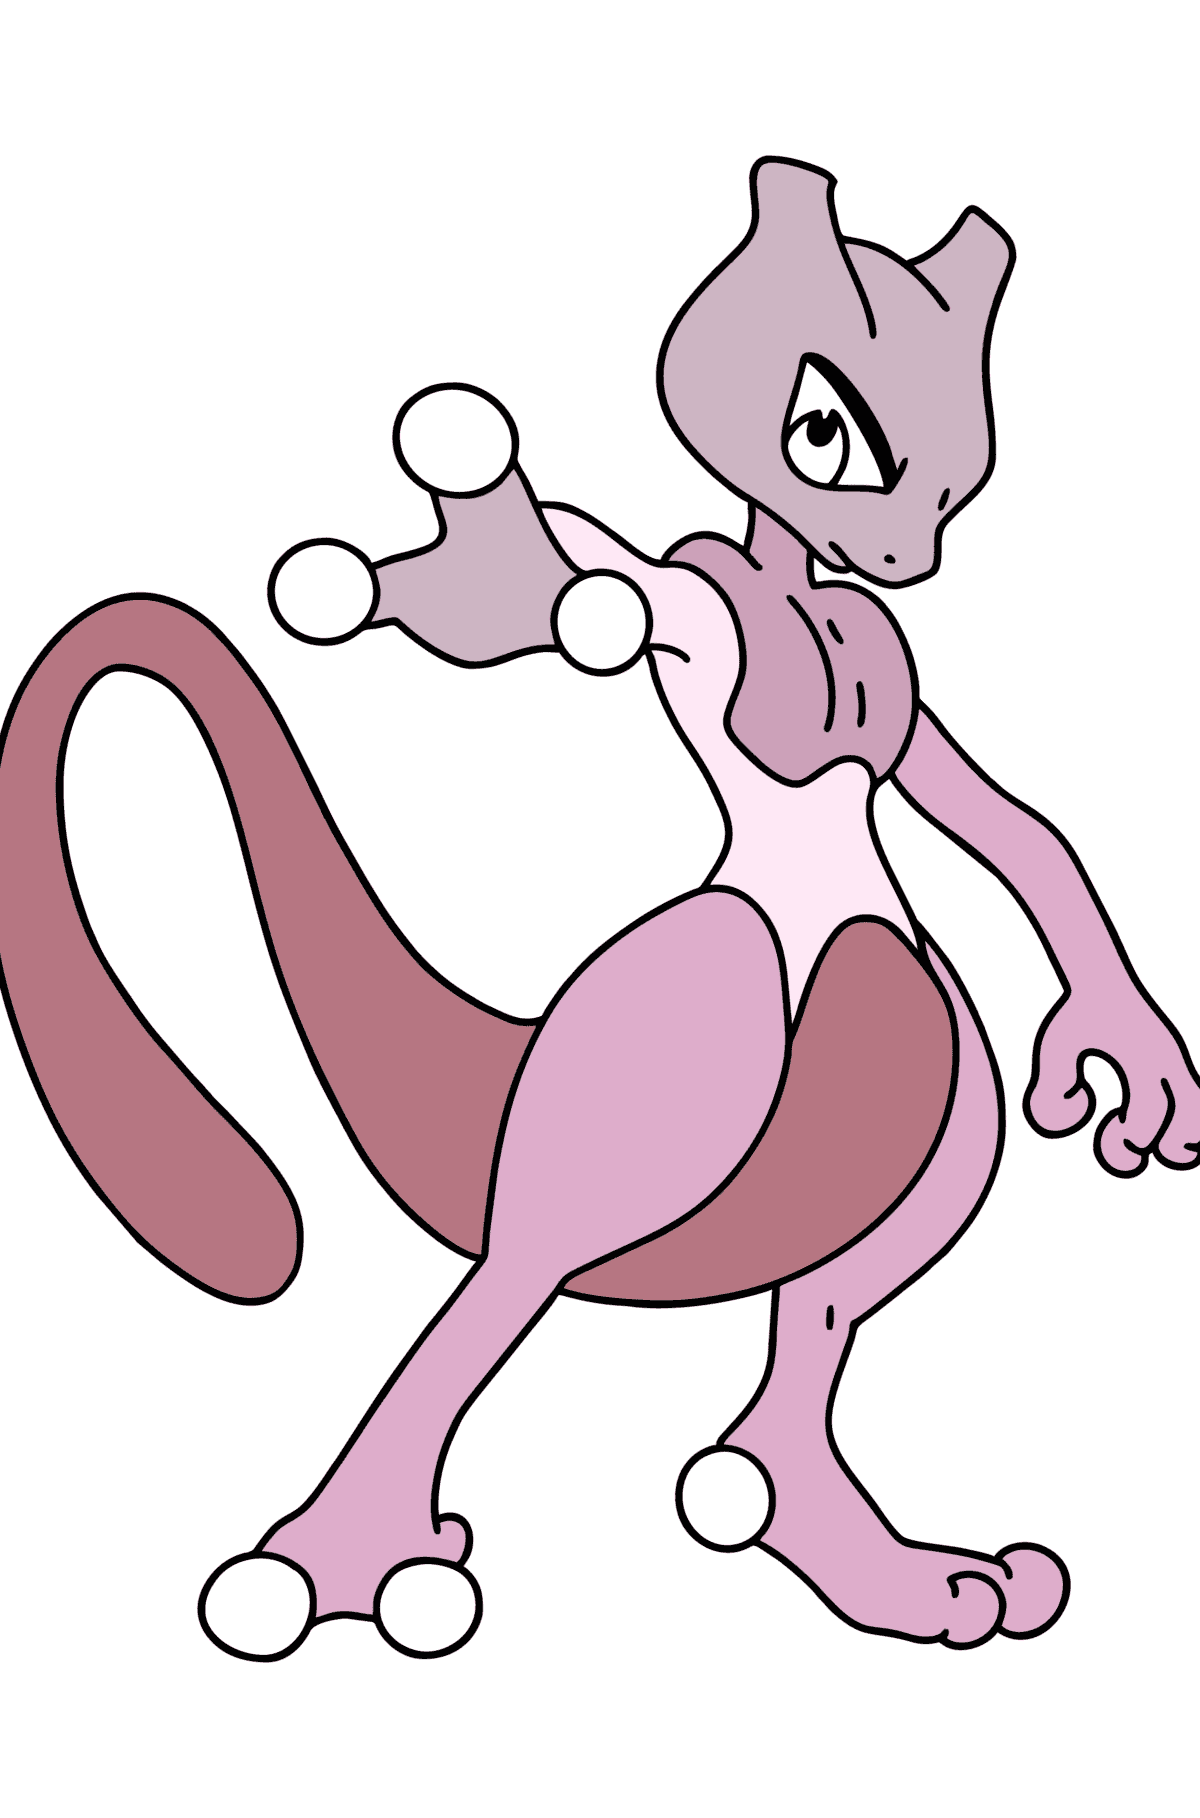 Coloring page Pokemon Go Mewtwo - Coloring Pages for Kids